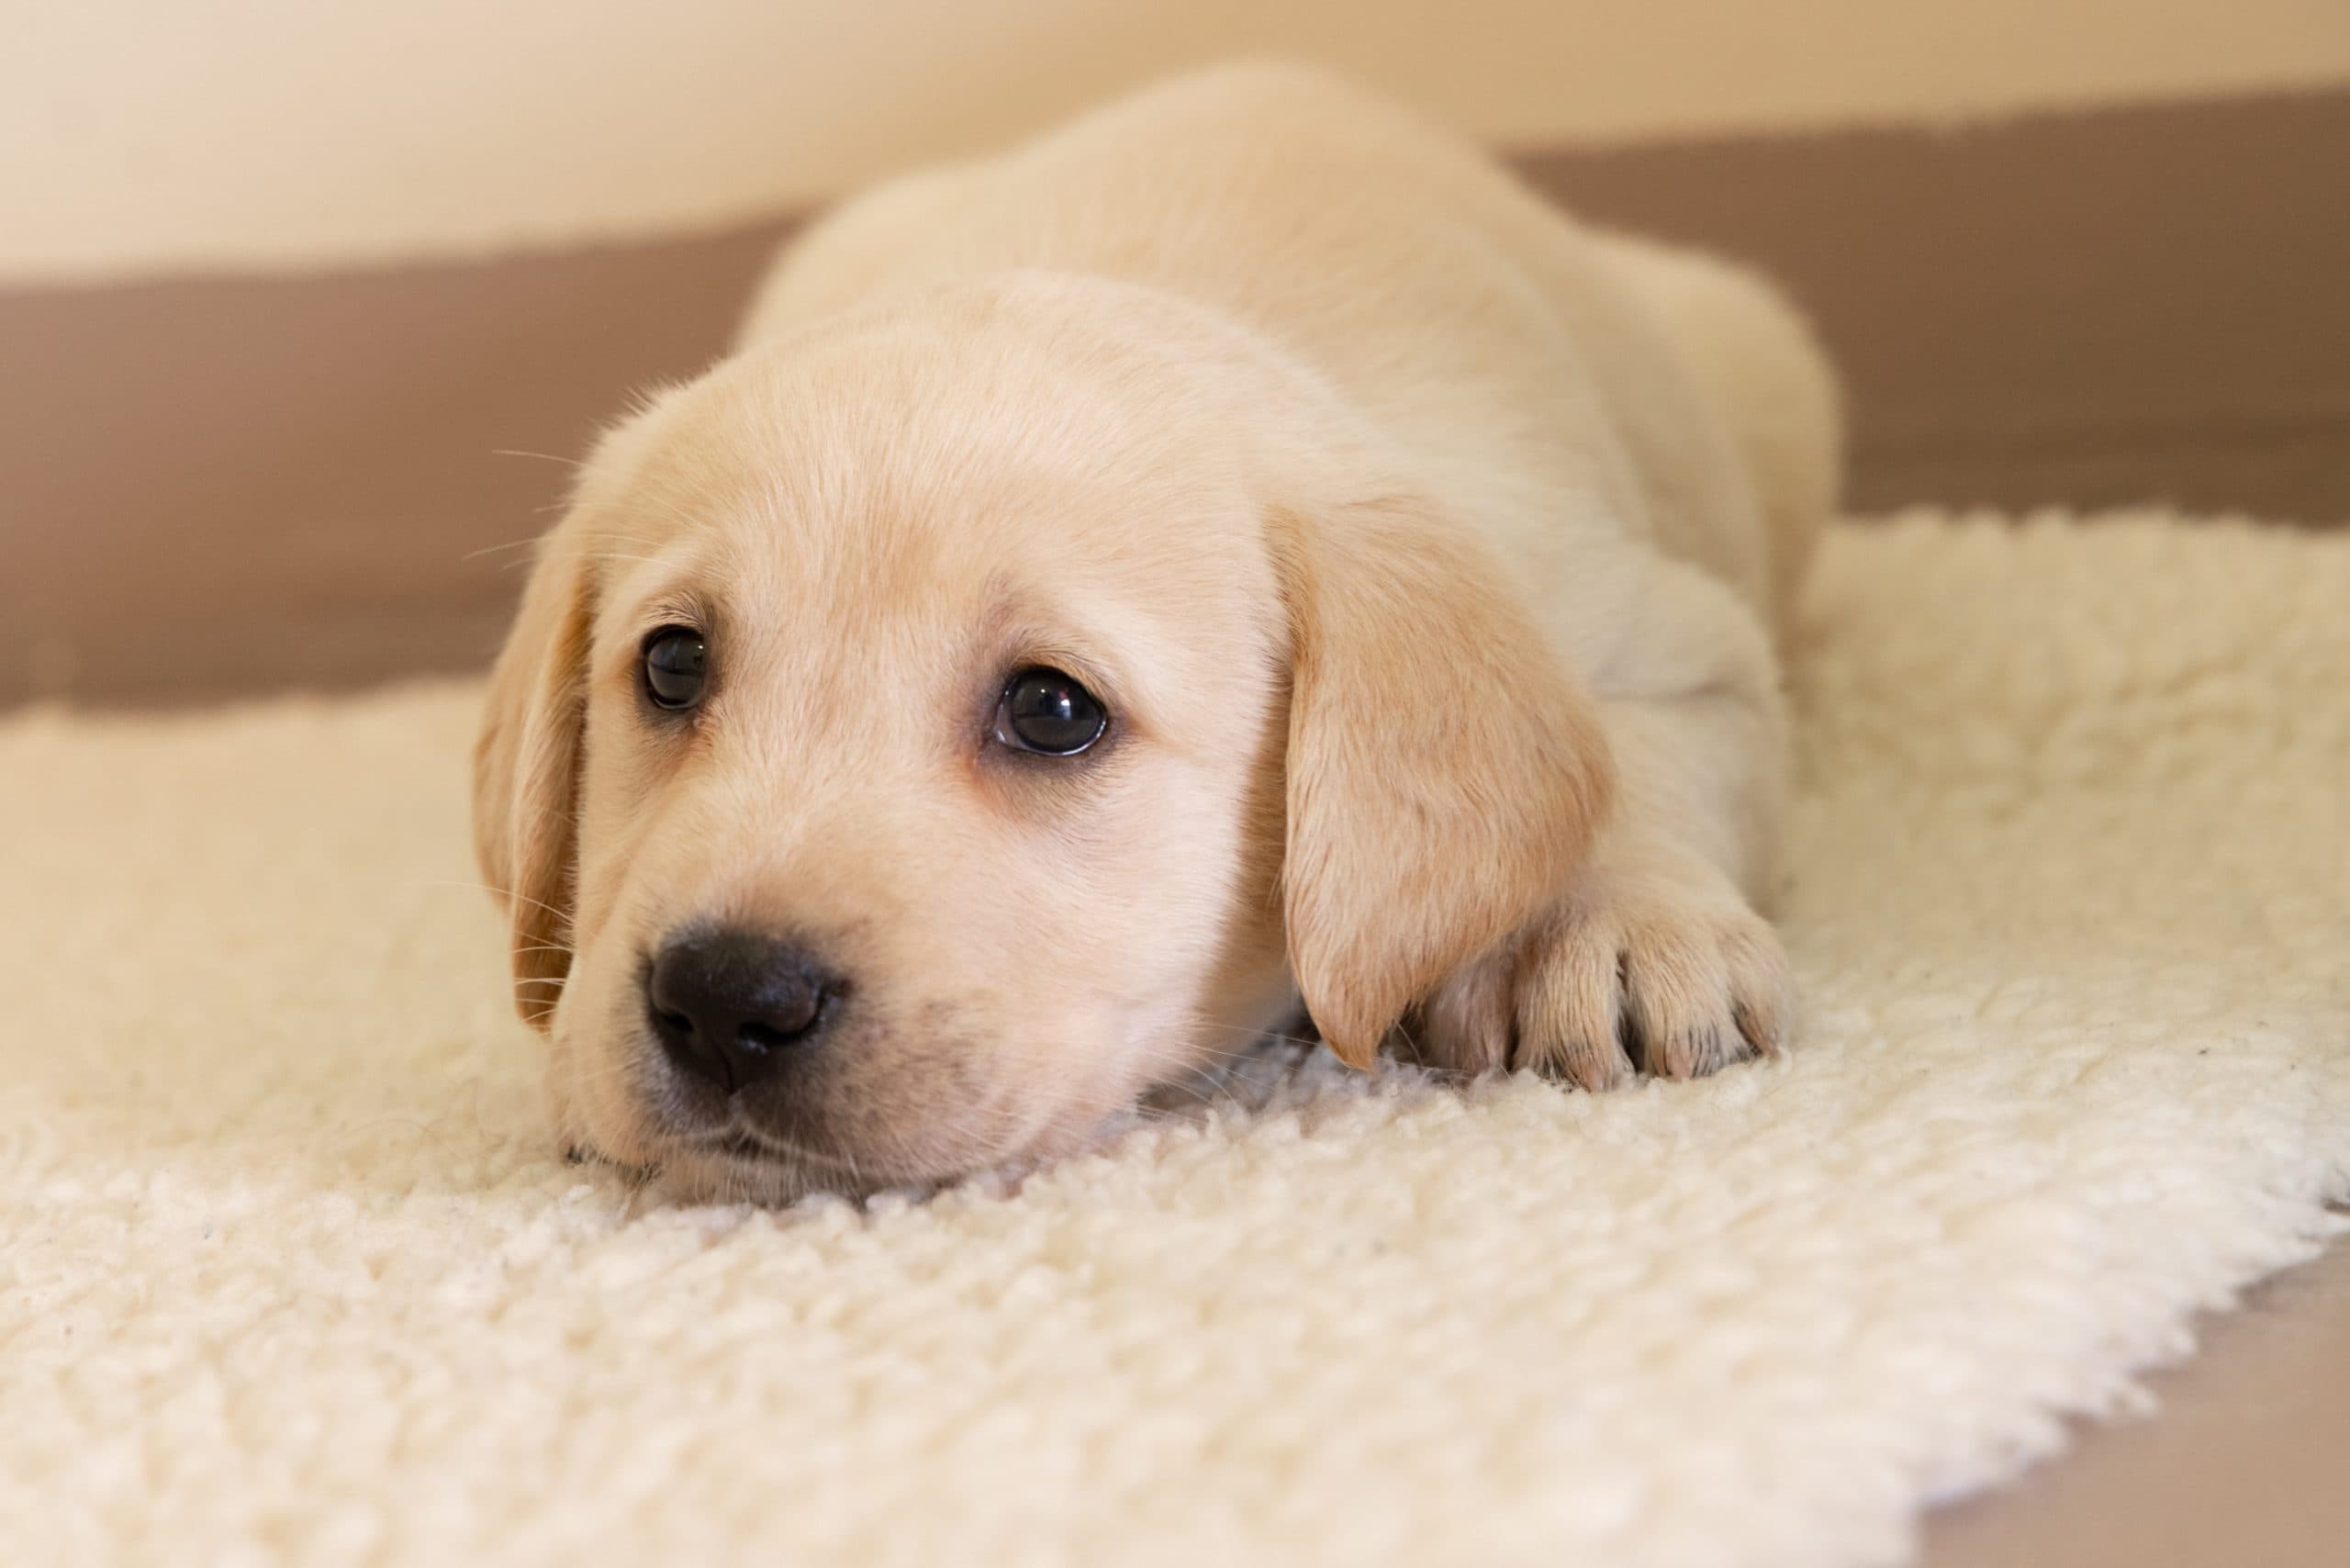 A young guide dog puppy is lying on a rug and giving us puppy dog eyes